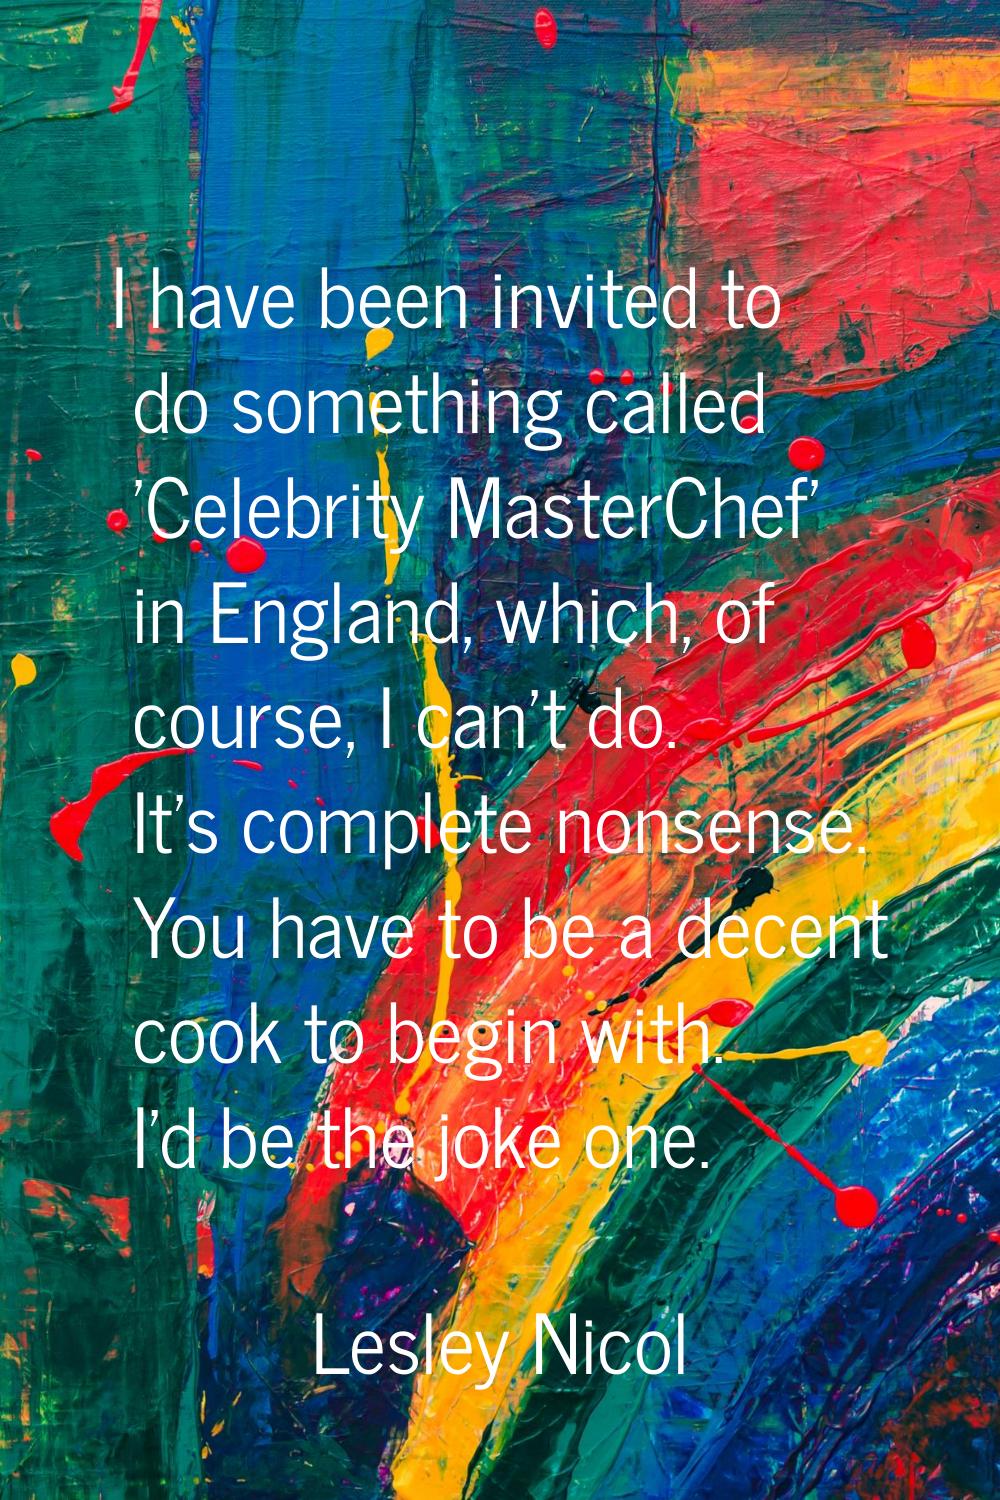 I have been invited to do something called 'Celebrity MasterChef' in England, which, of course, I c